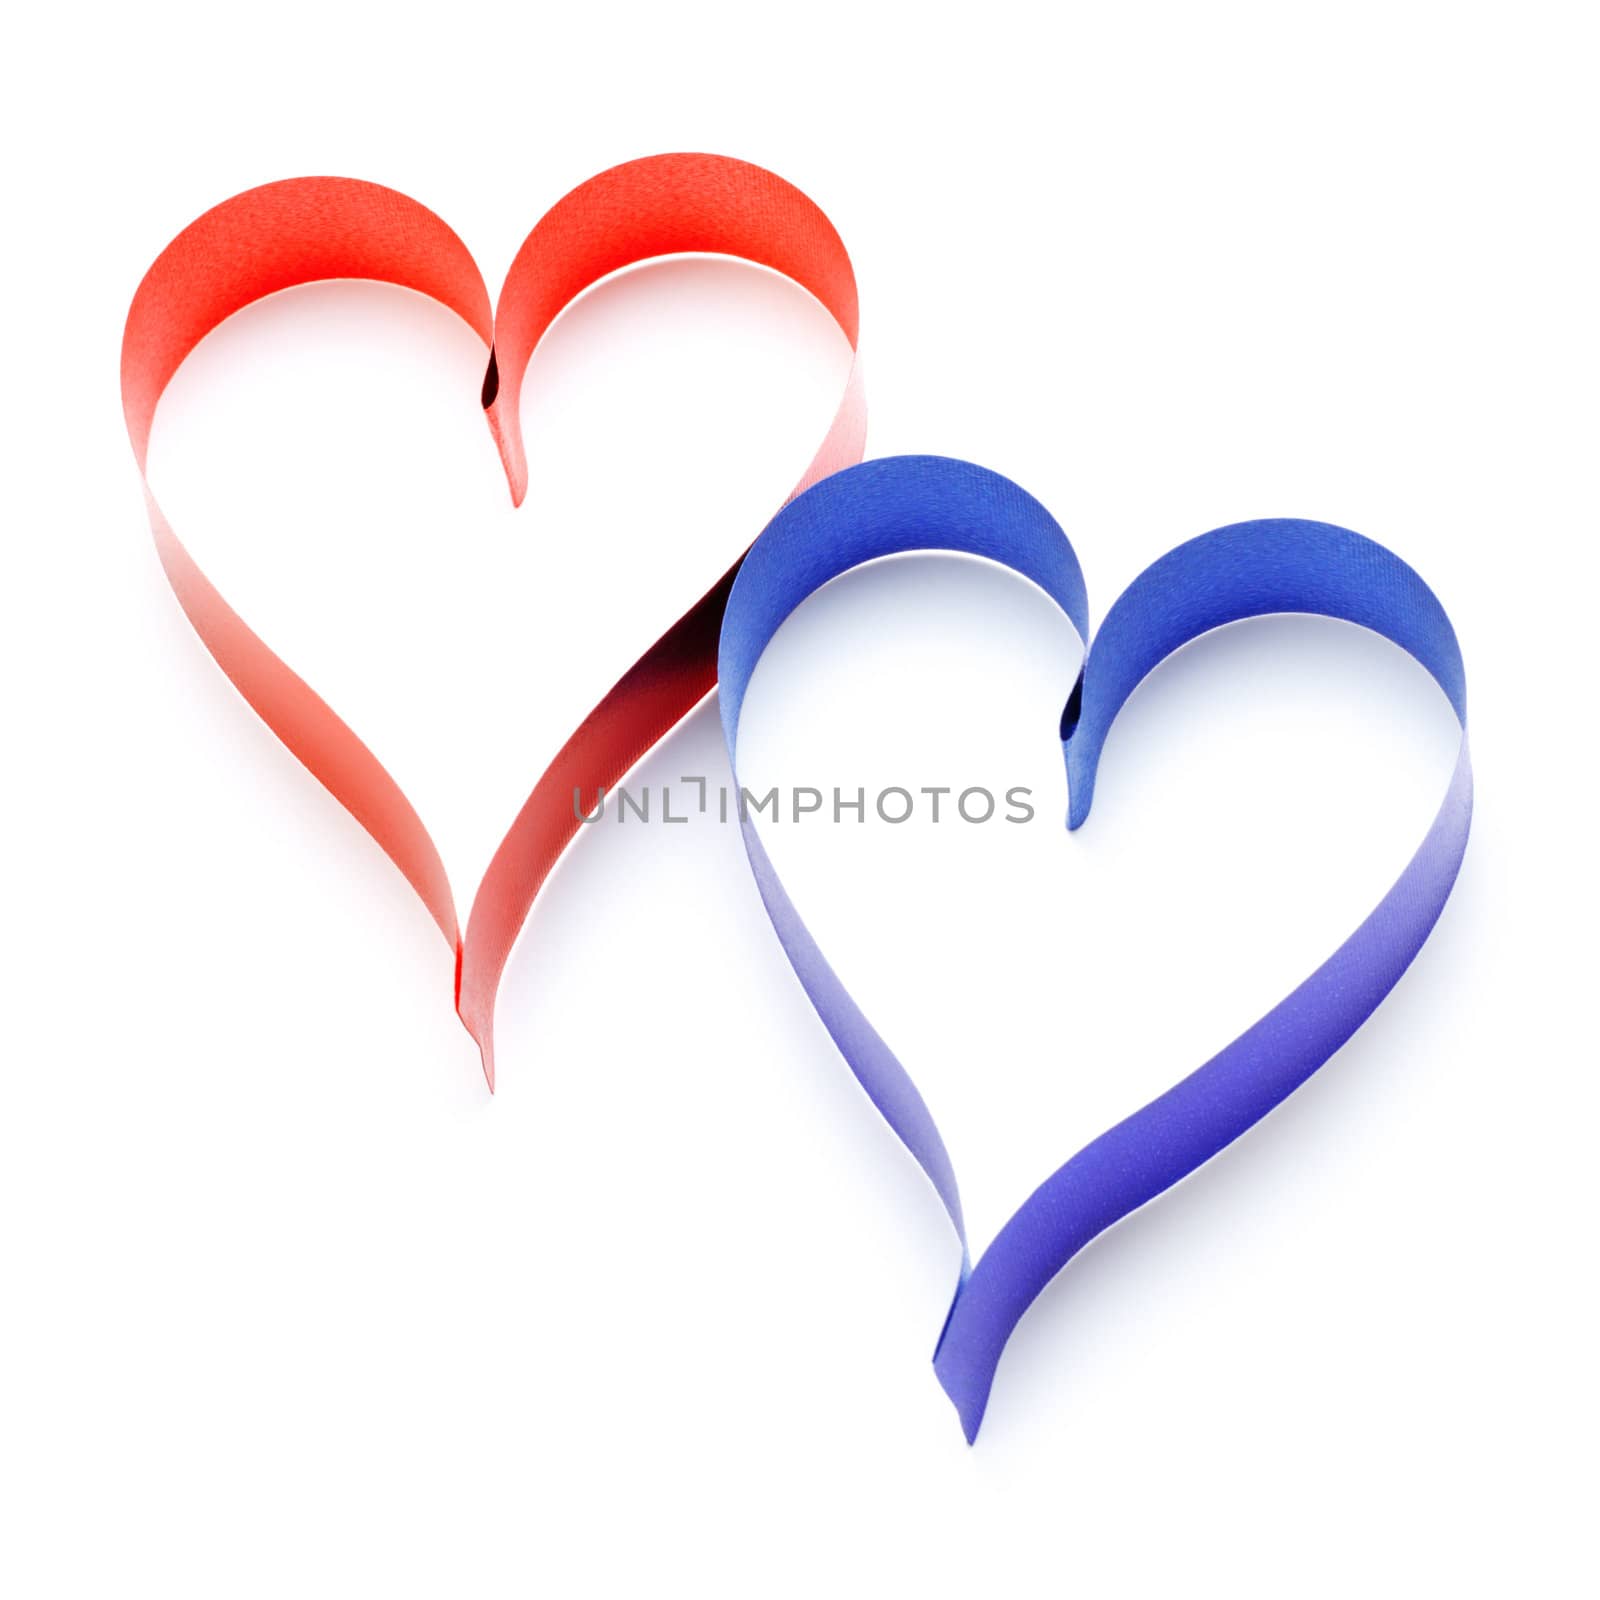 two heart shaped ribbons isolated on white